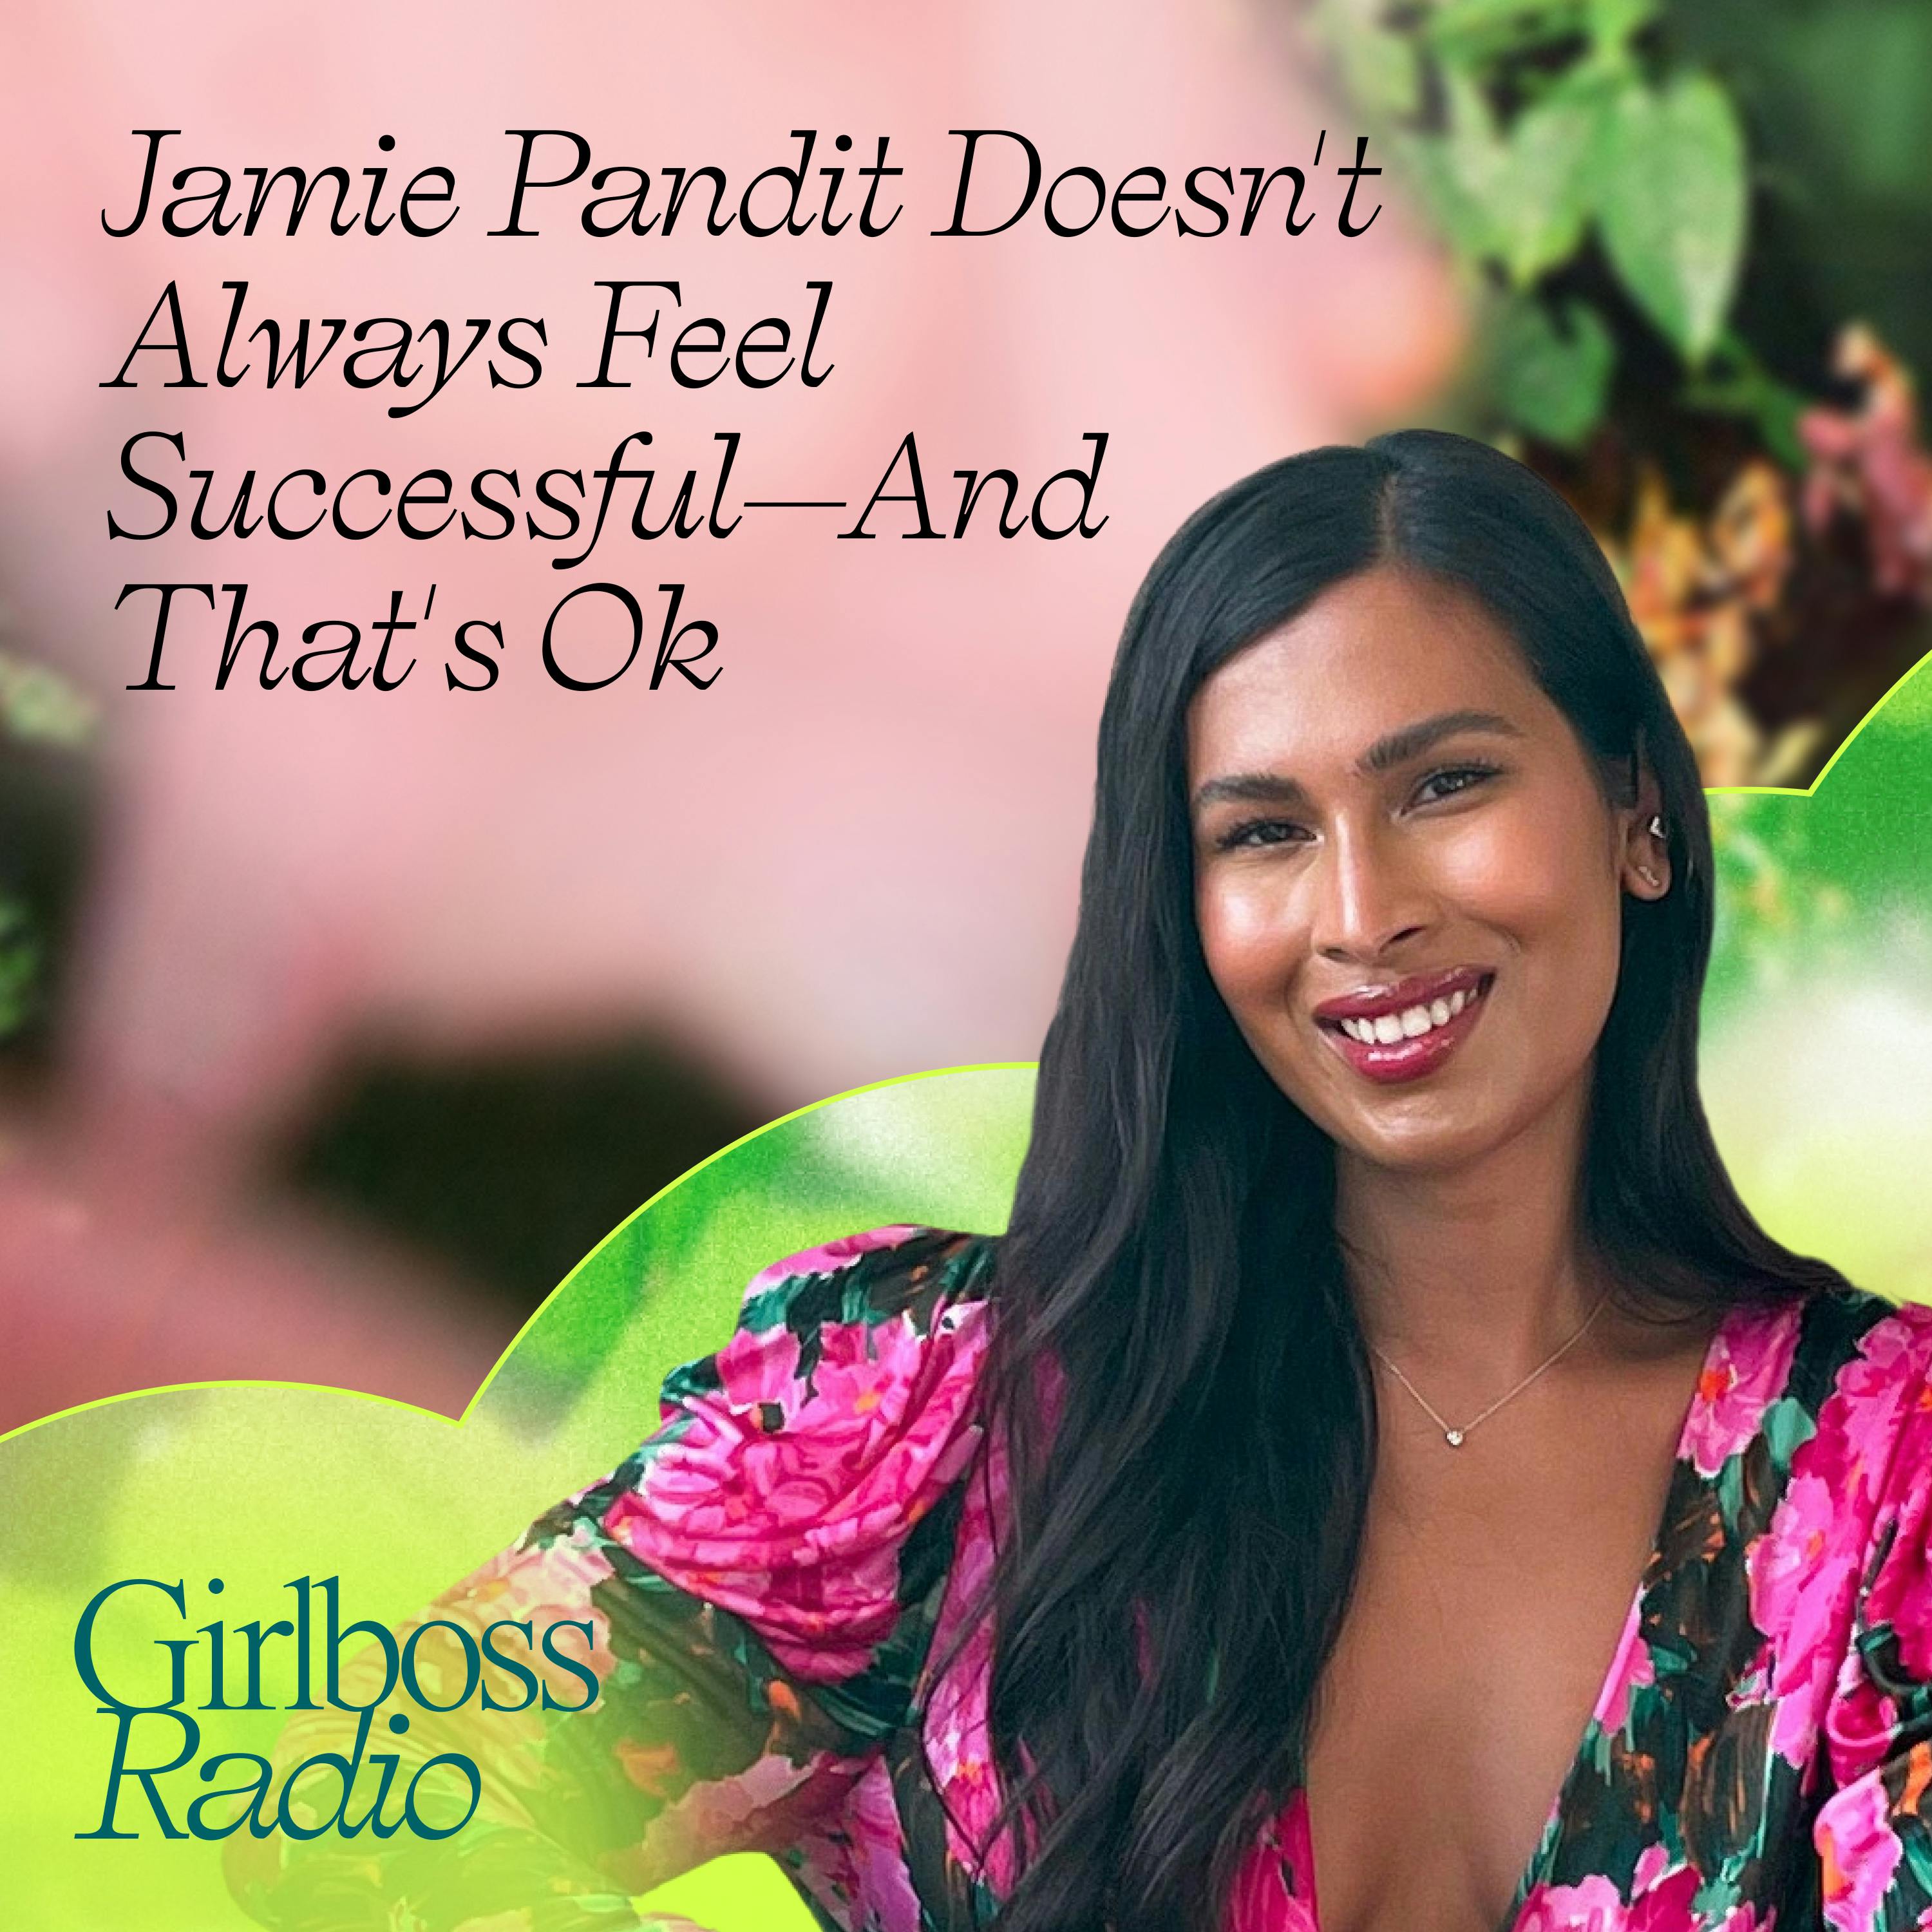 Jamie Pandit Doesn't Always Feel Successful—And That's OK